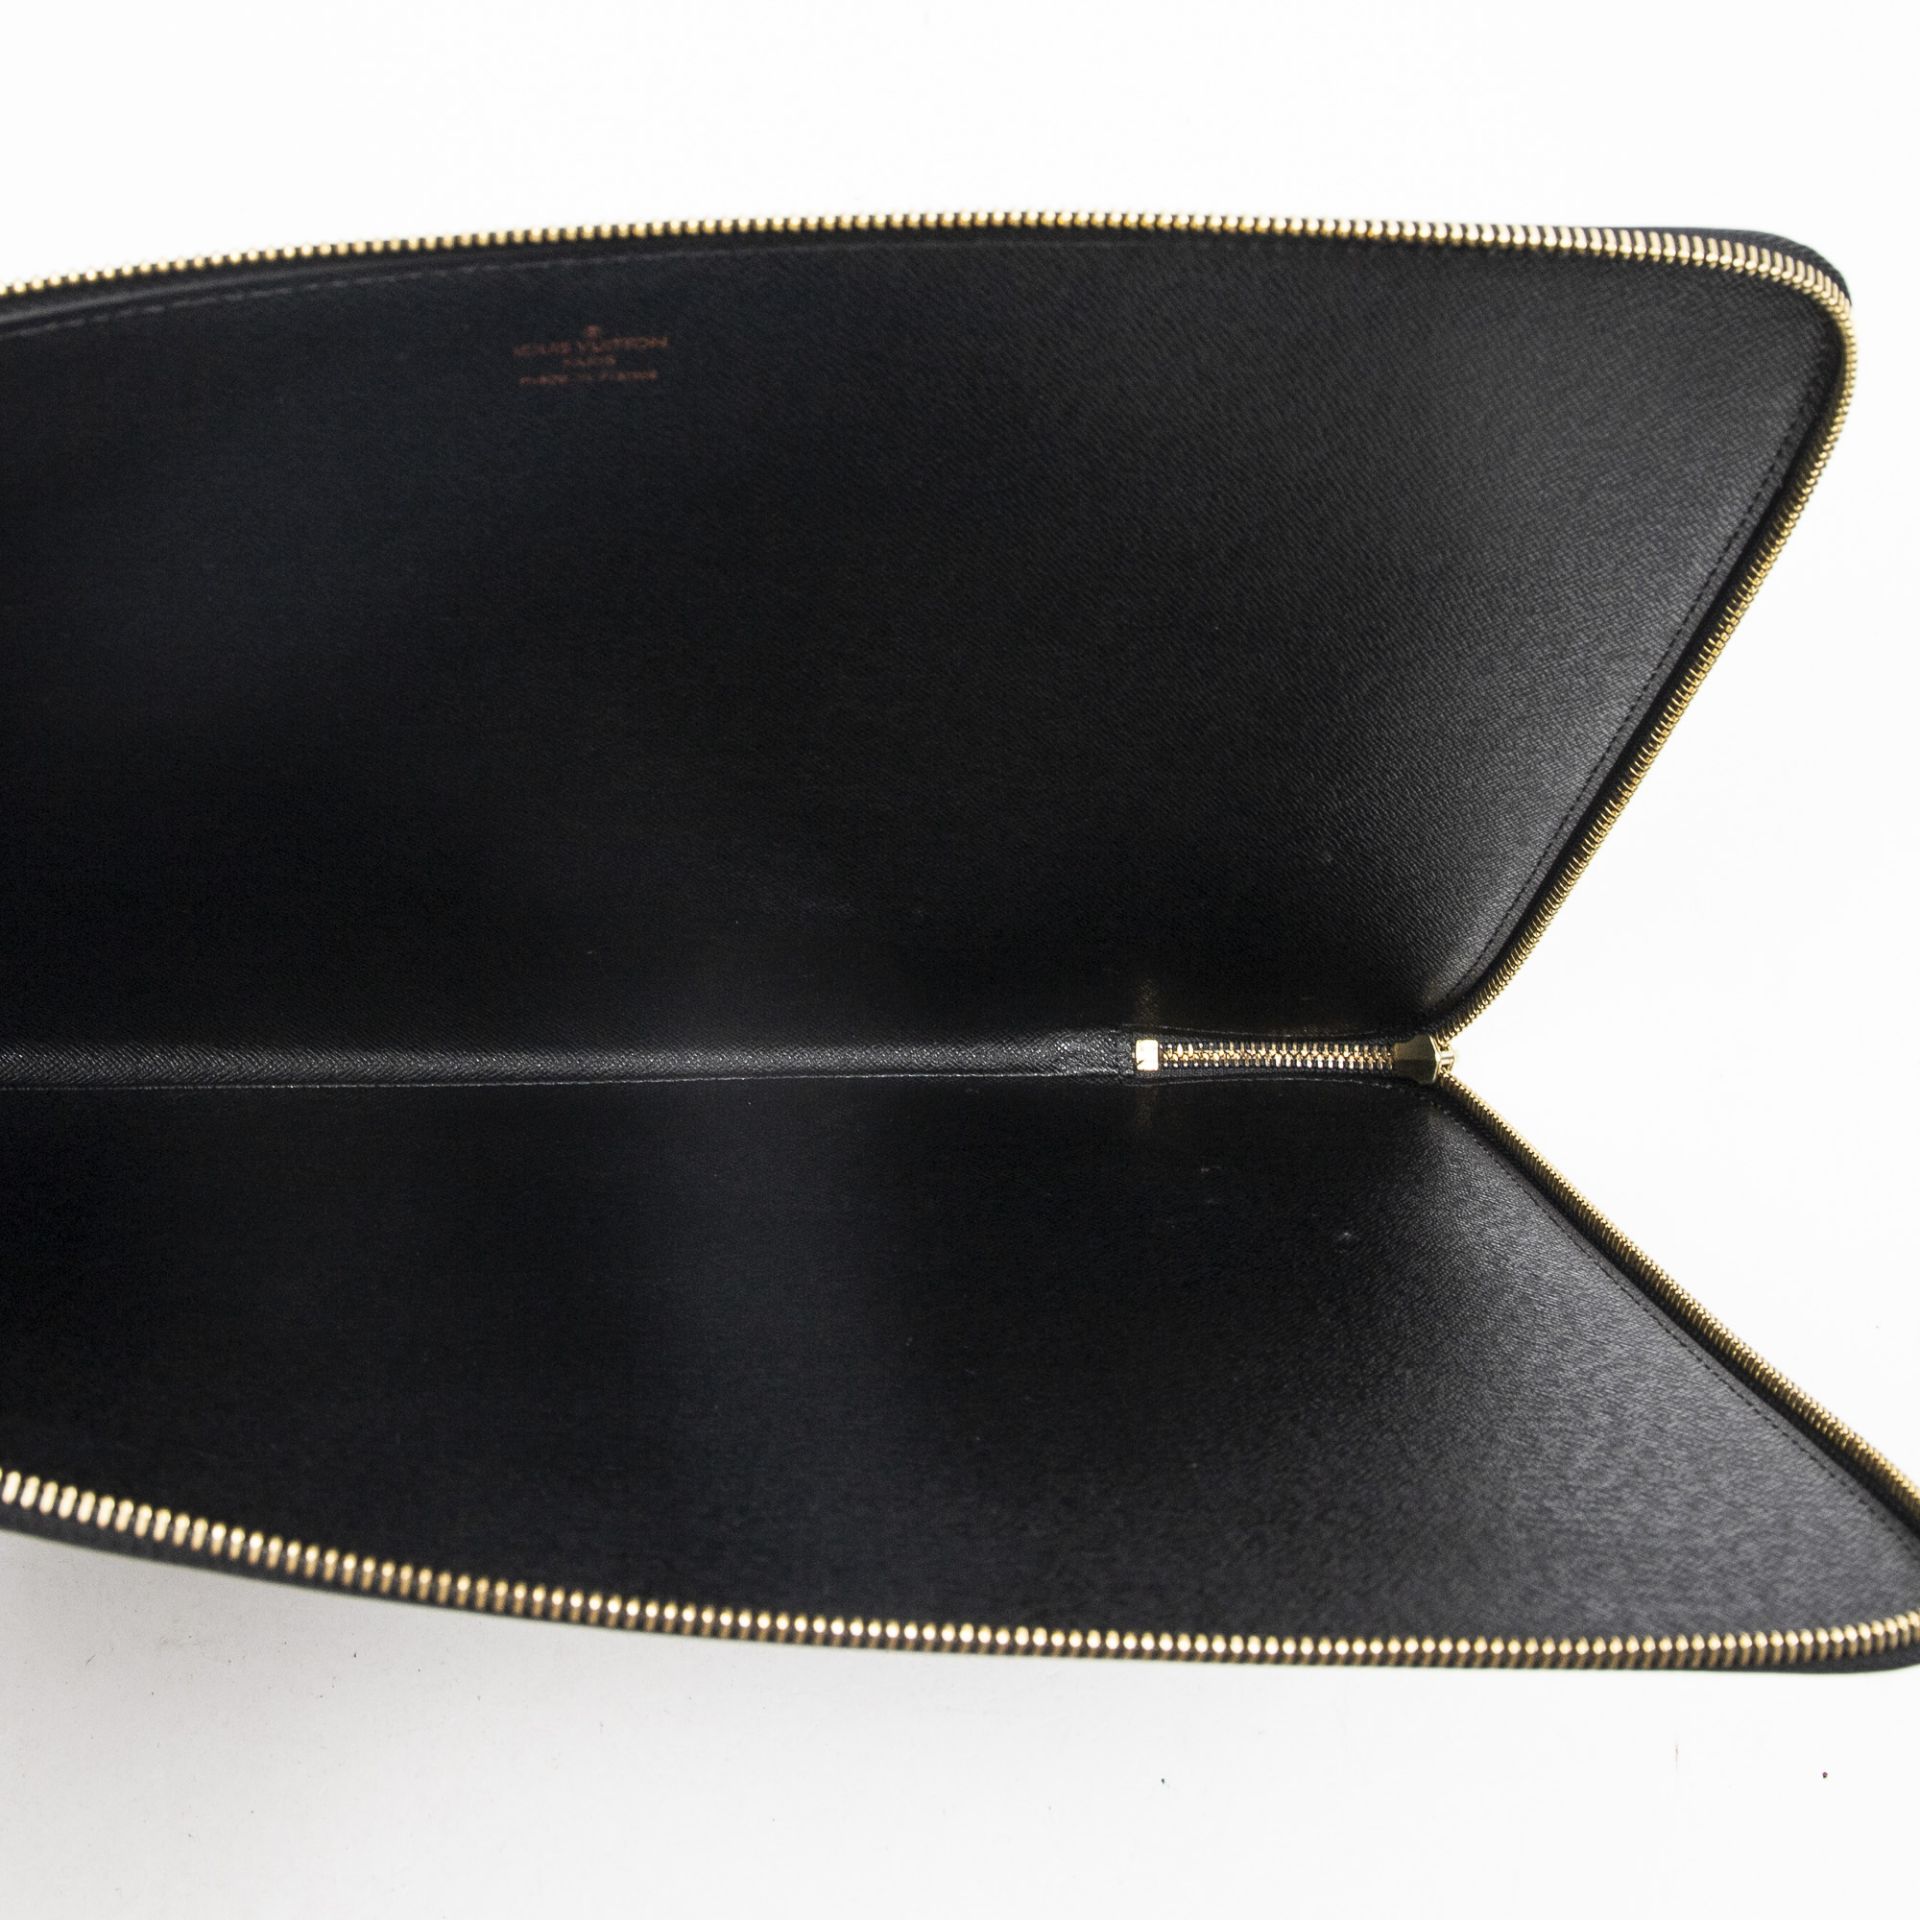 RRP £935.00 Lot To Contain 1 Louis Vuitton Calf Leather Poche Documents Handbag In Black - 38*28*2cm - Image 3 of 3